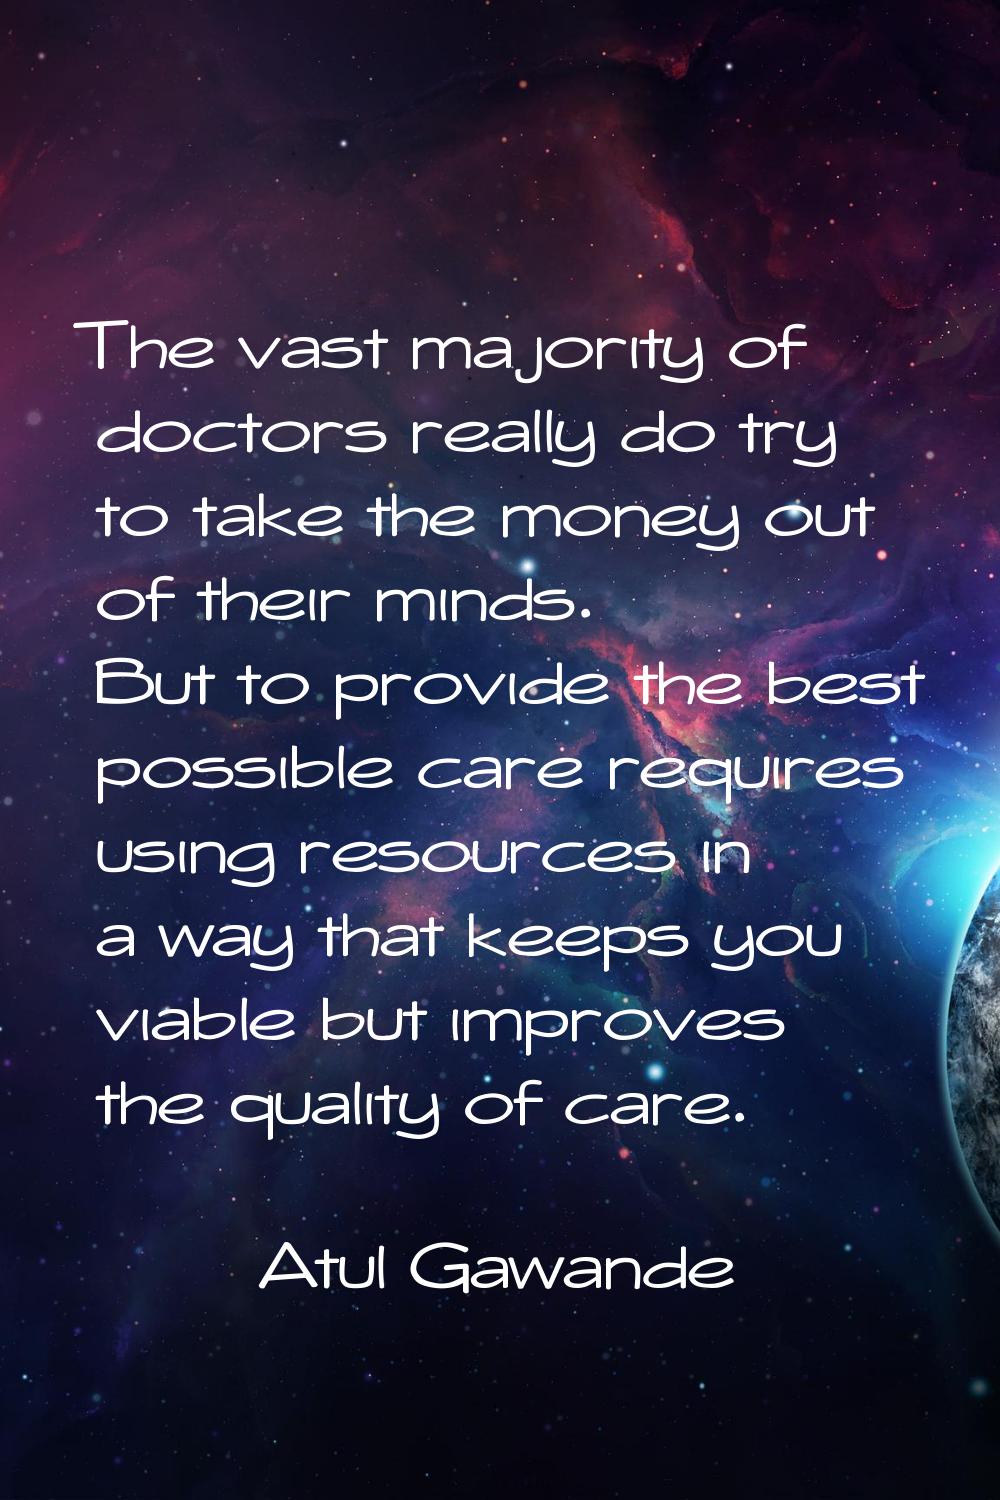 The vast majority of doctors really do try to take the money out of their minds. But to provide the